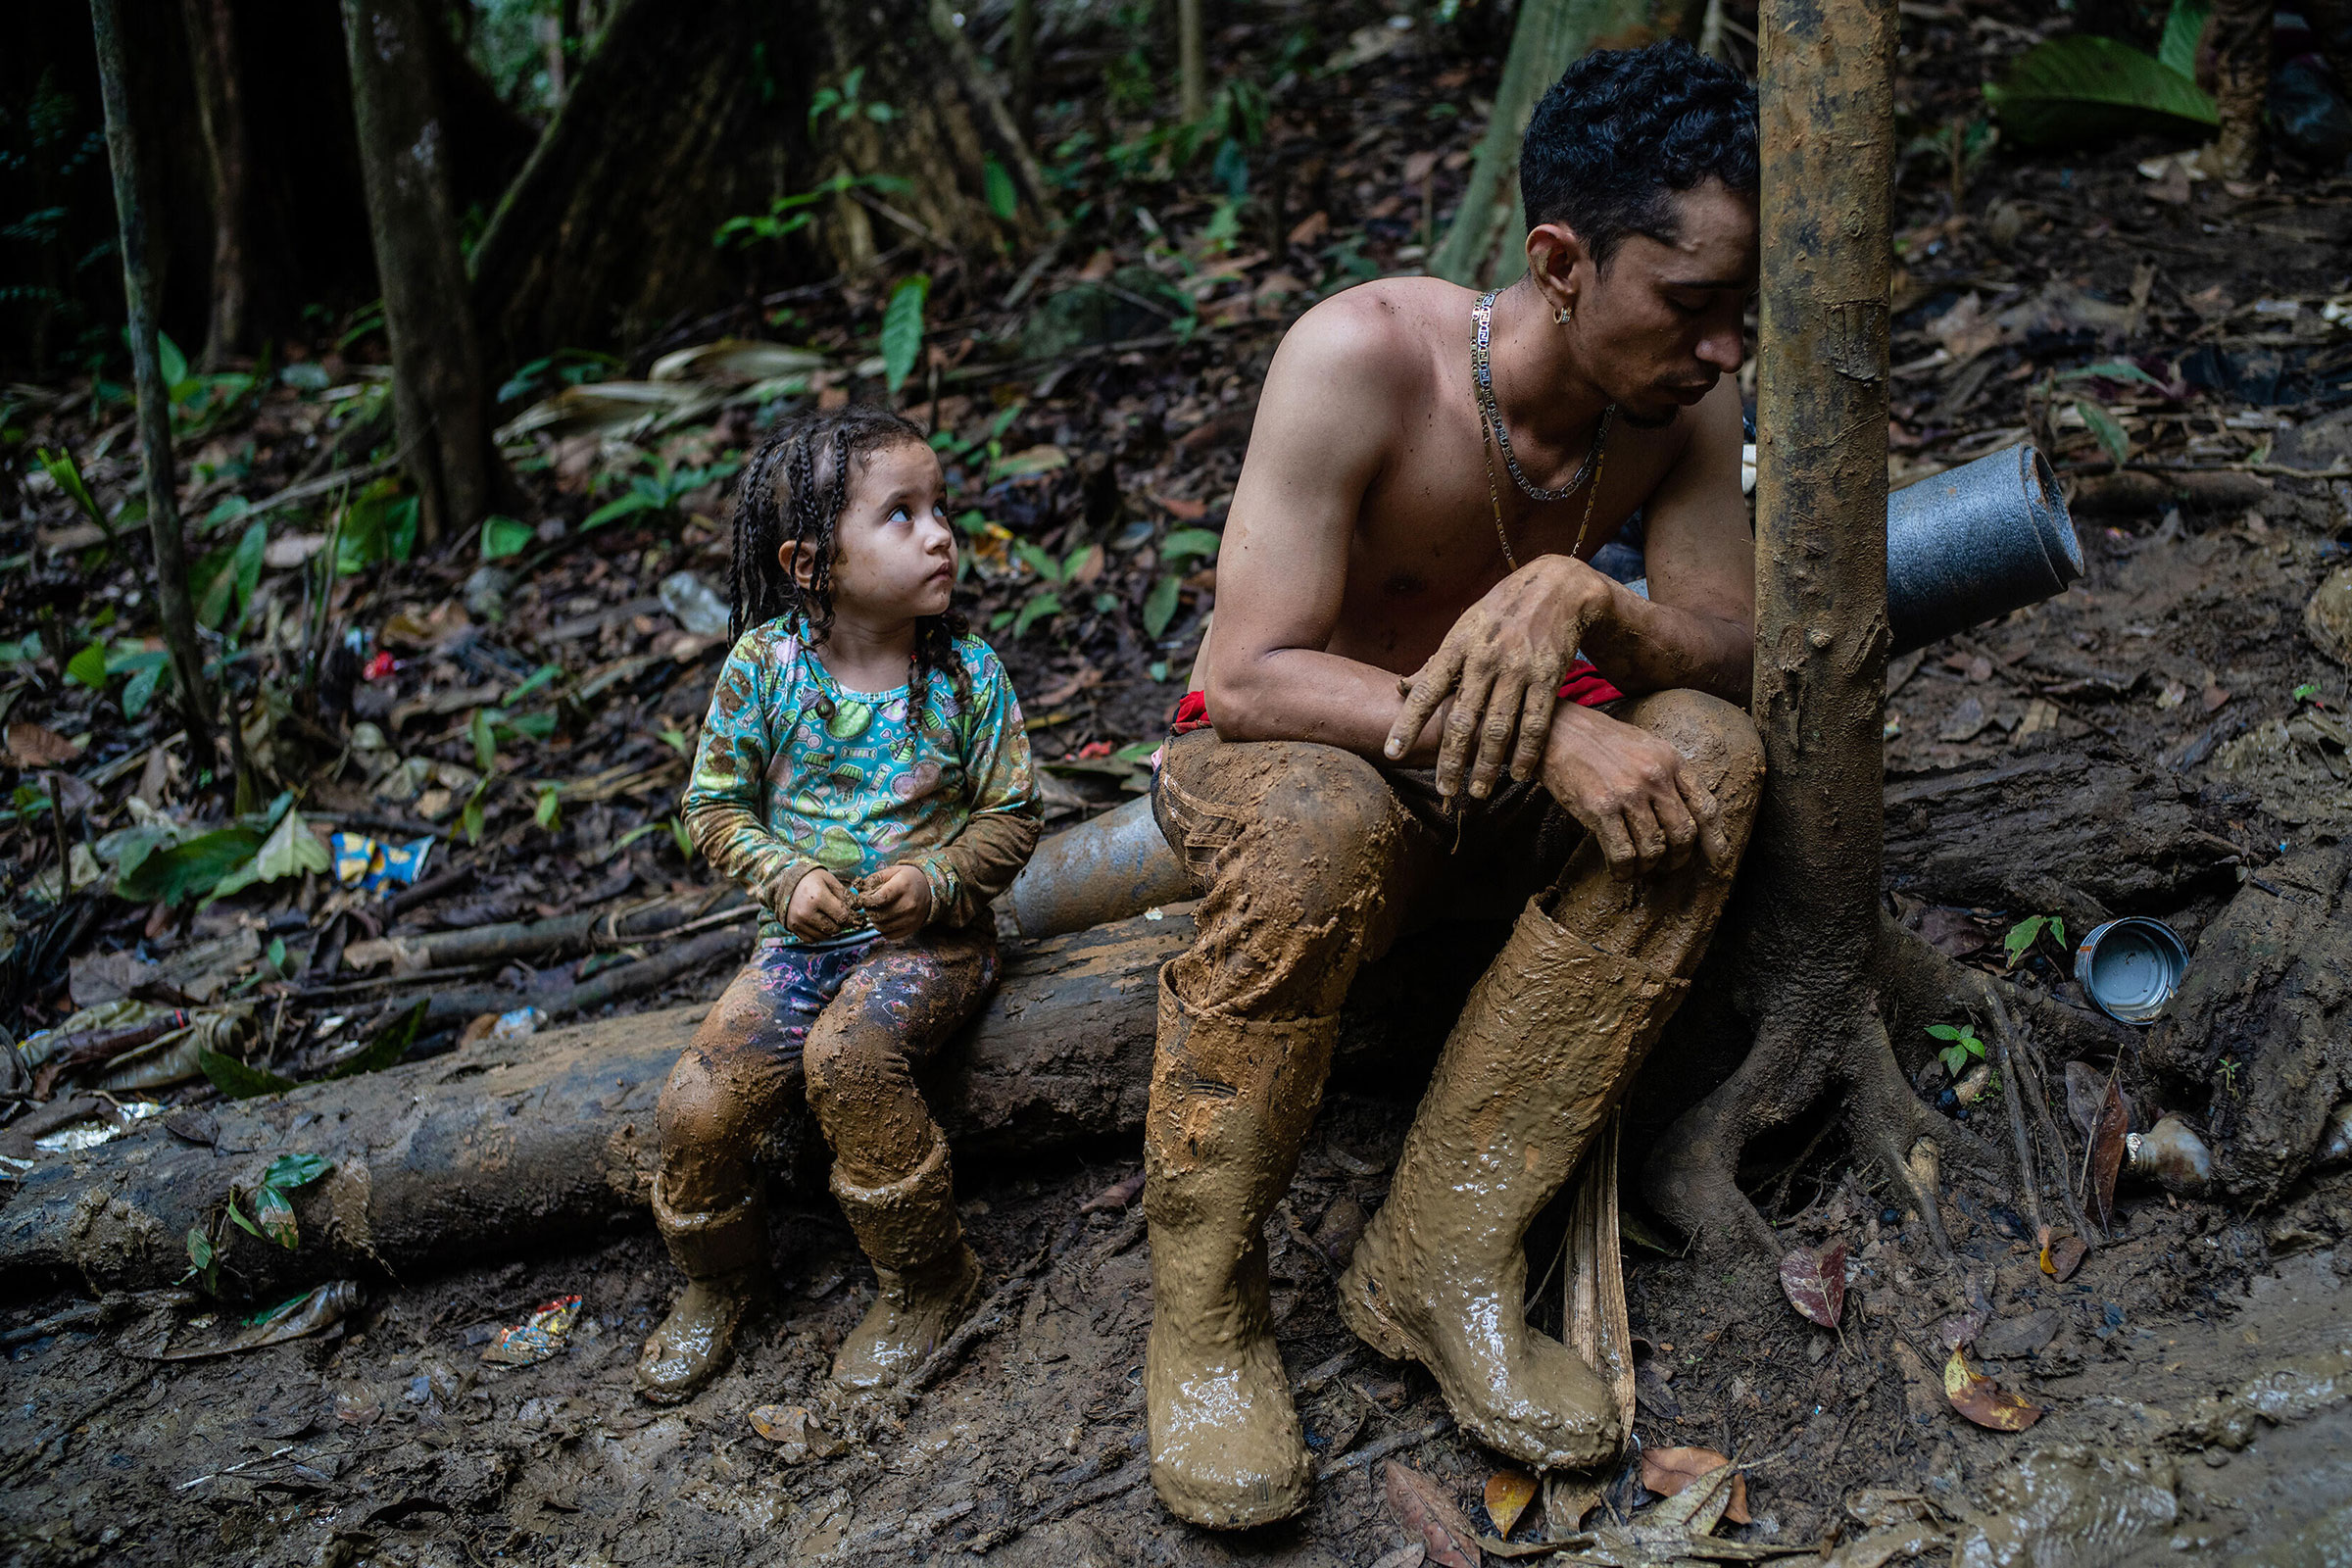 An exhausted man and child rest in the Darien Gap, with a week of walking still ahead across the 66-mile stretch of jungle terrain between Colombia and Panama, on Sept. 23. Two crises are converging as record numbers of Venezuelans risk the deadly trek to reach the U.S. border: the economic and humanitarian disaster underway in South America and the bitter fight over immigration policy in Washington. (Federico Rios—The New York Times/Redux)